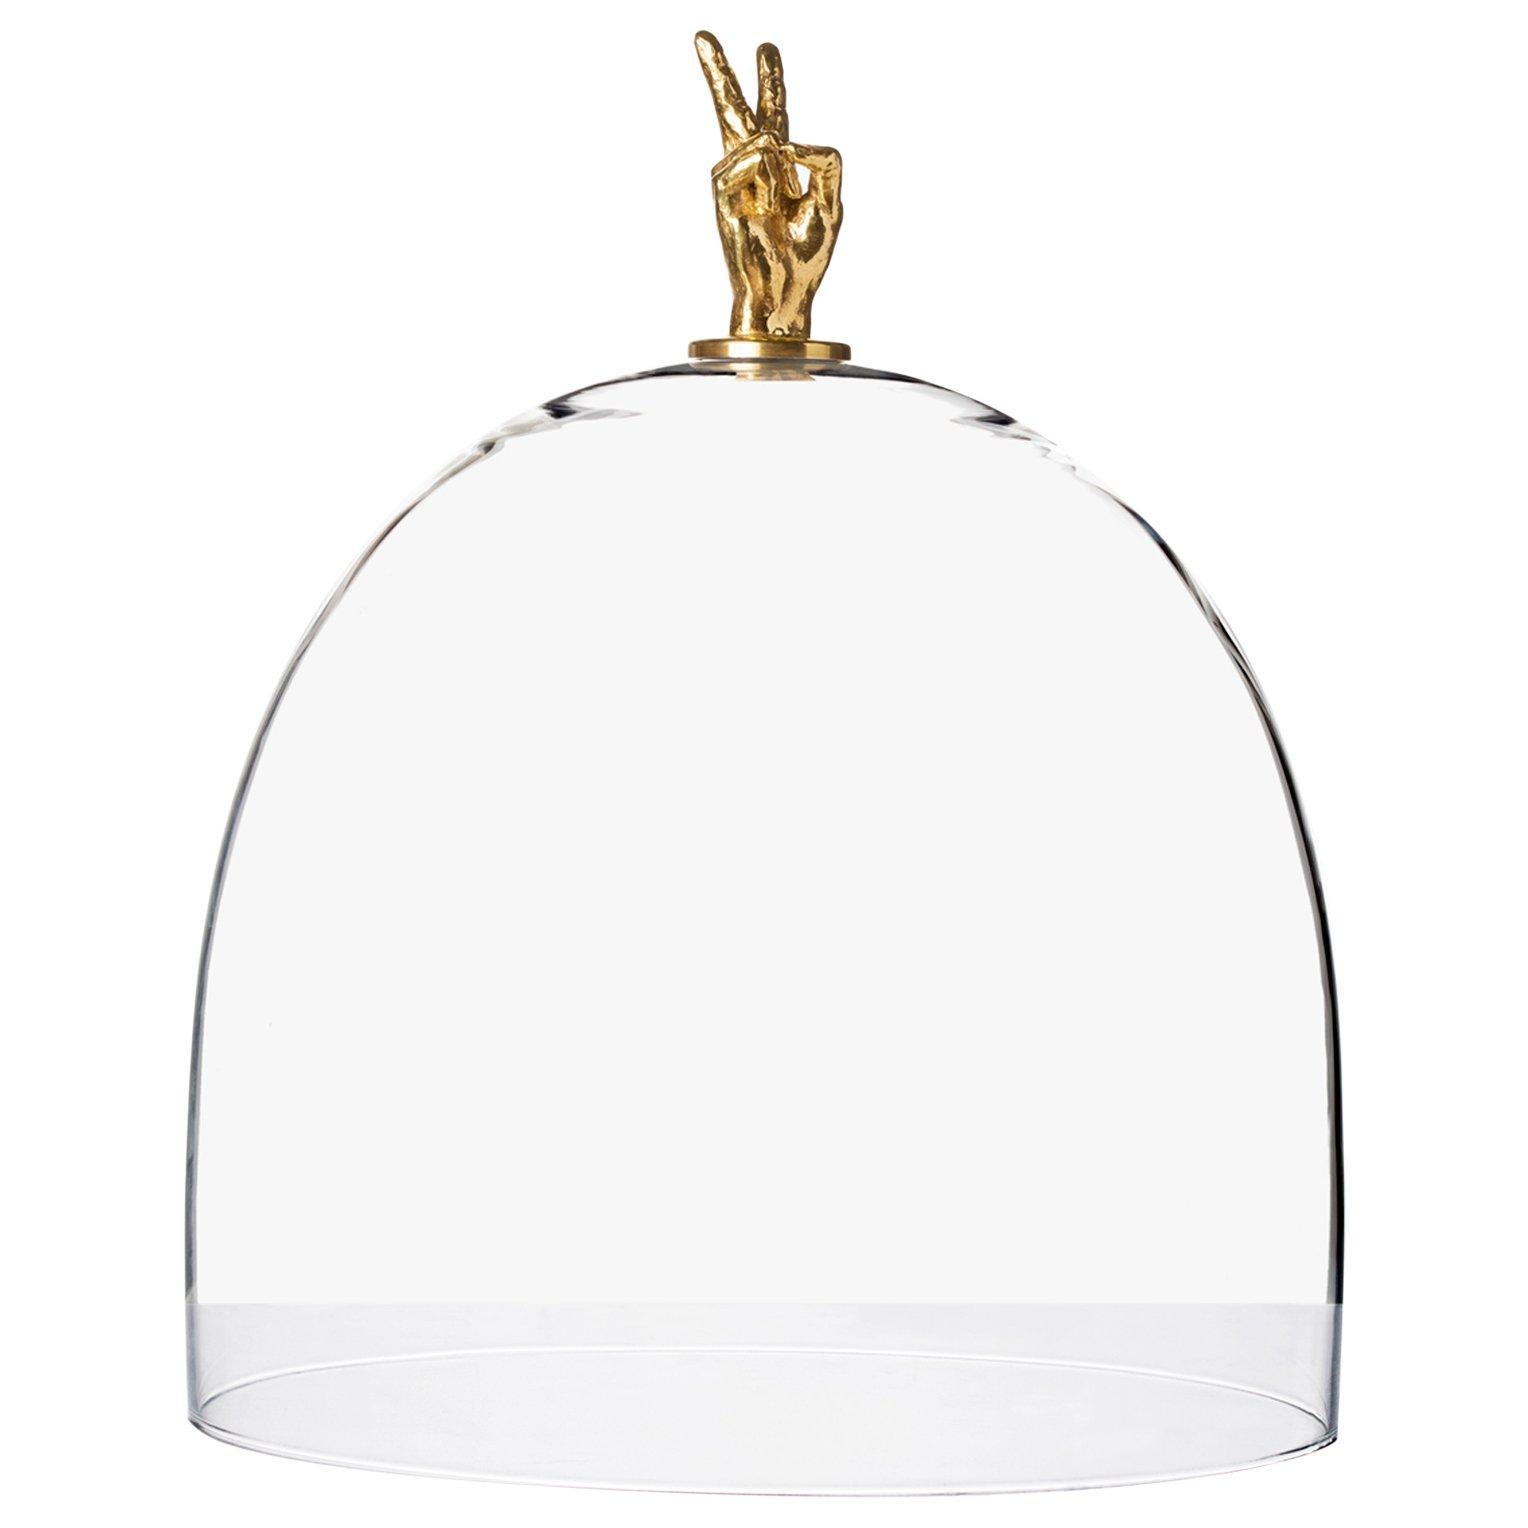 Titel, Top Victory Glass and Brass Dome (Moderne) im Angebot